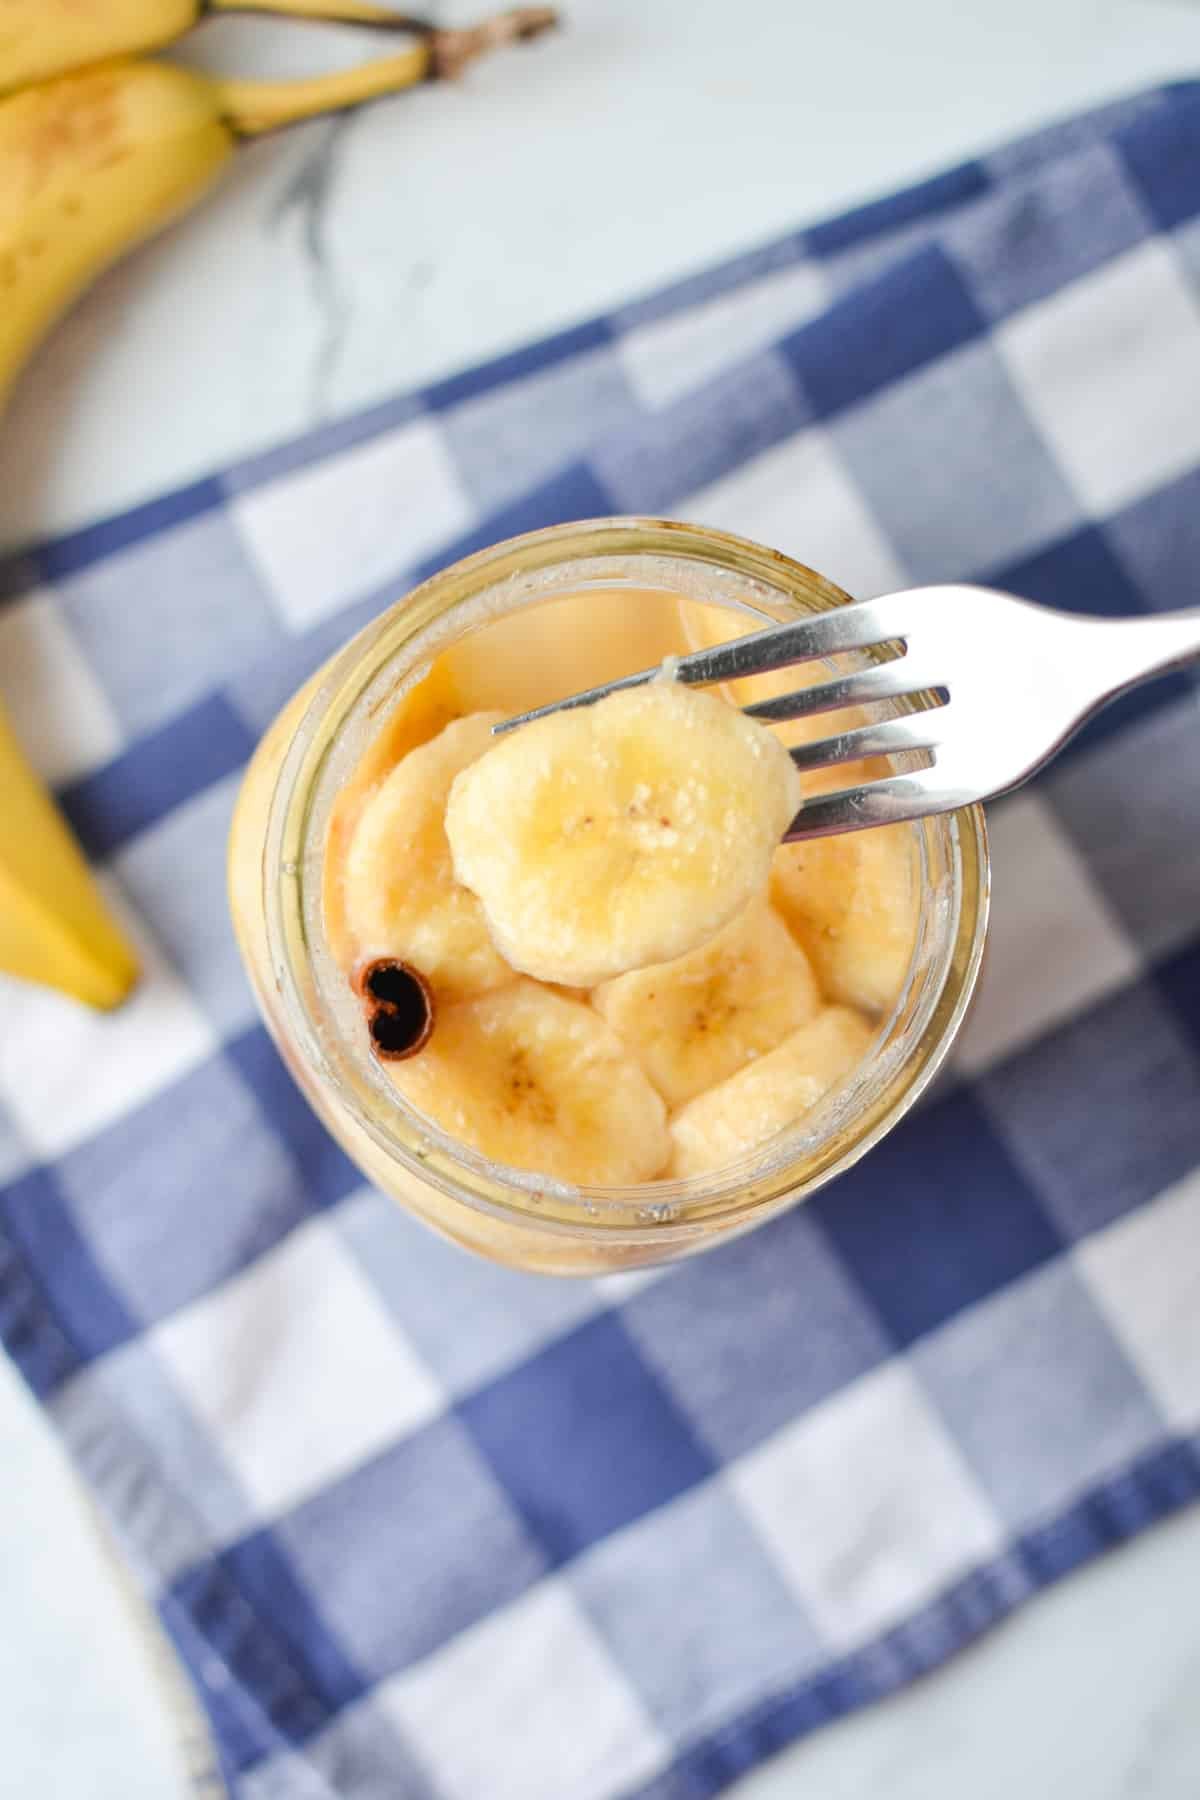 Taking a banana slice from a jar with a fork.